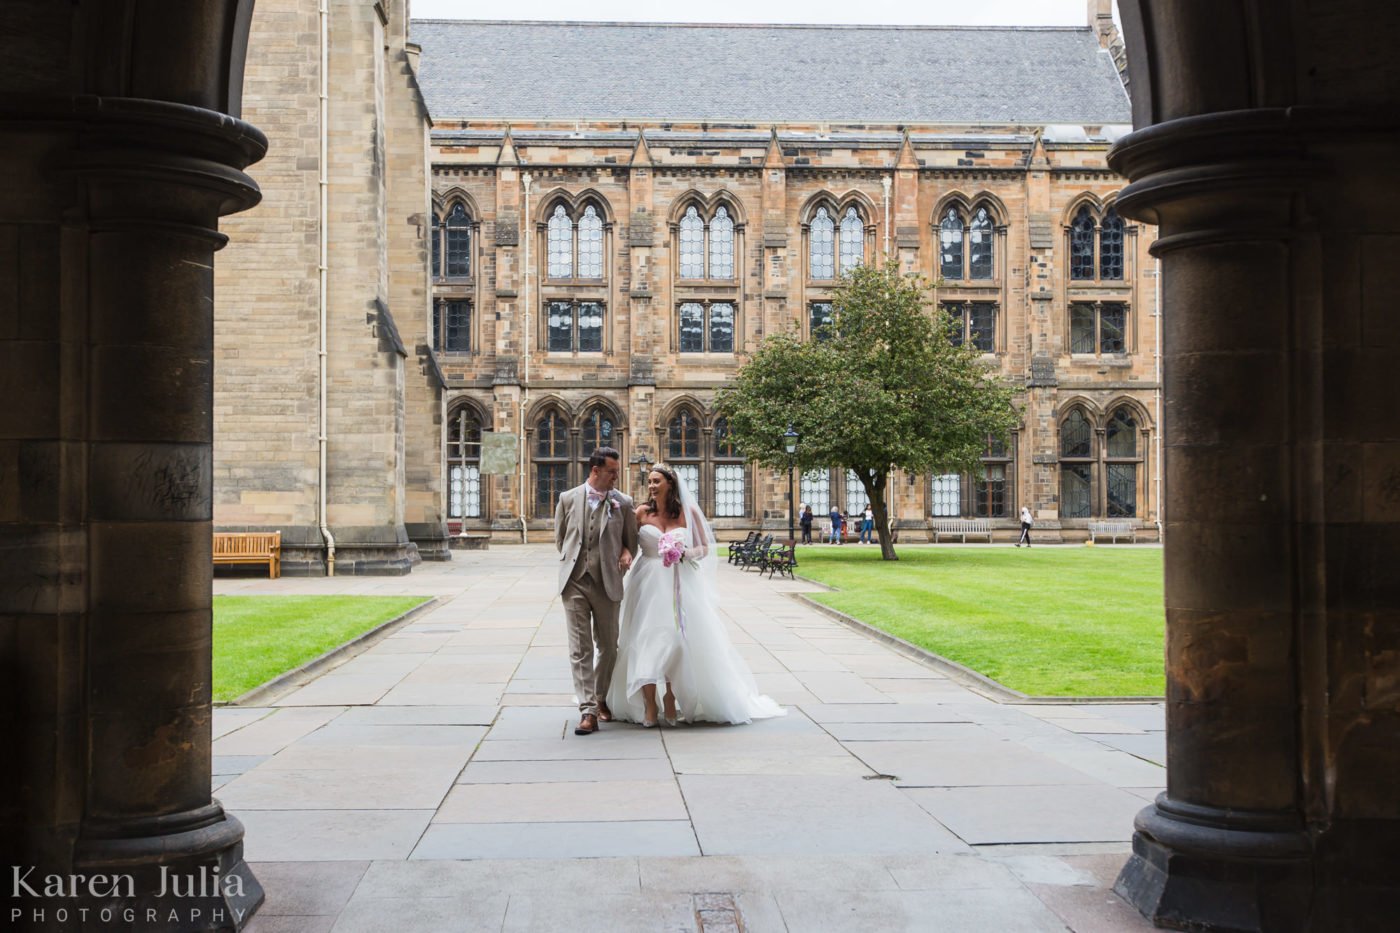 bride and groom walking together in the University of Glasgow courtyard on their wedding day